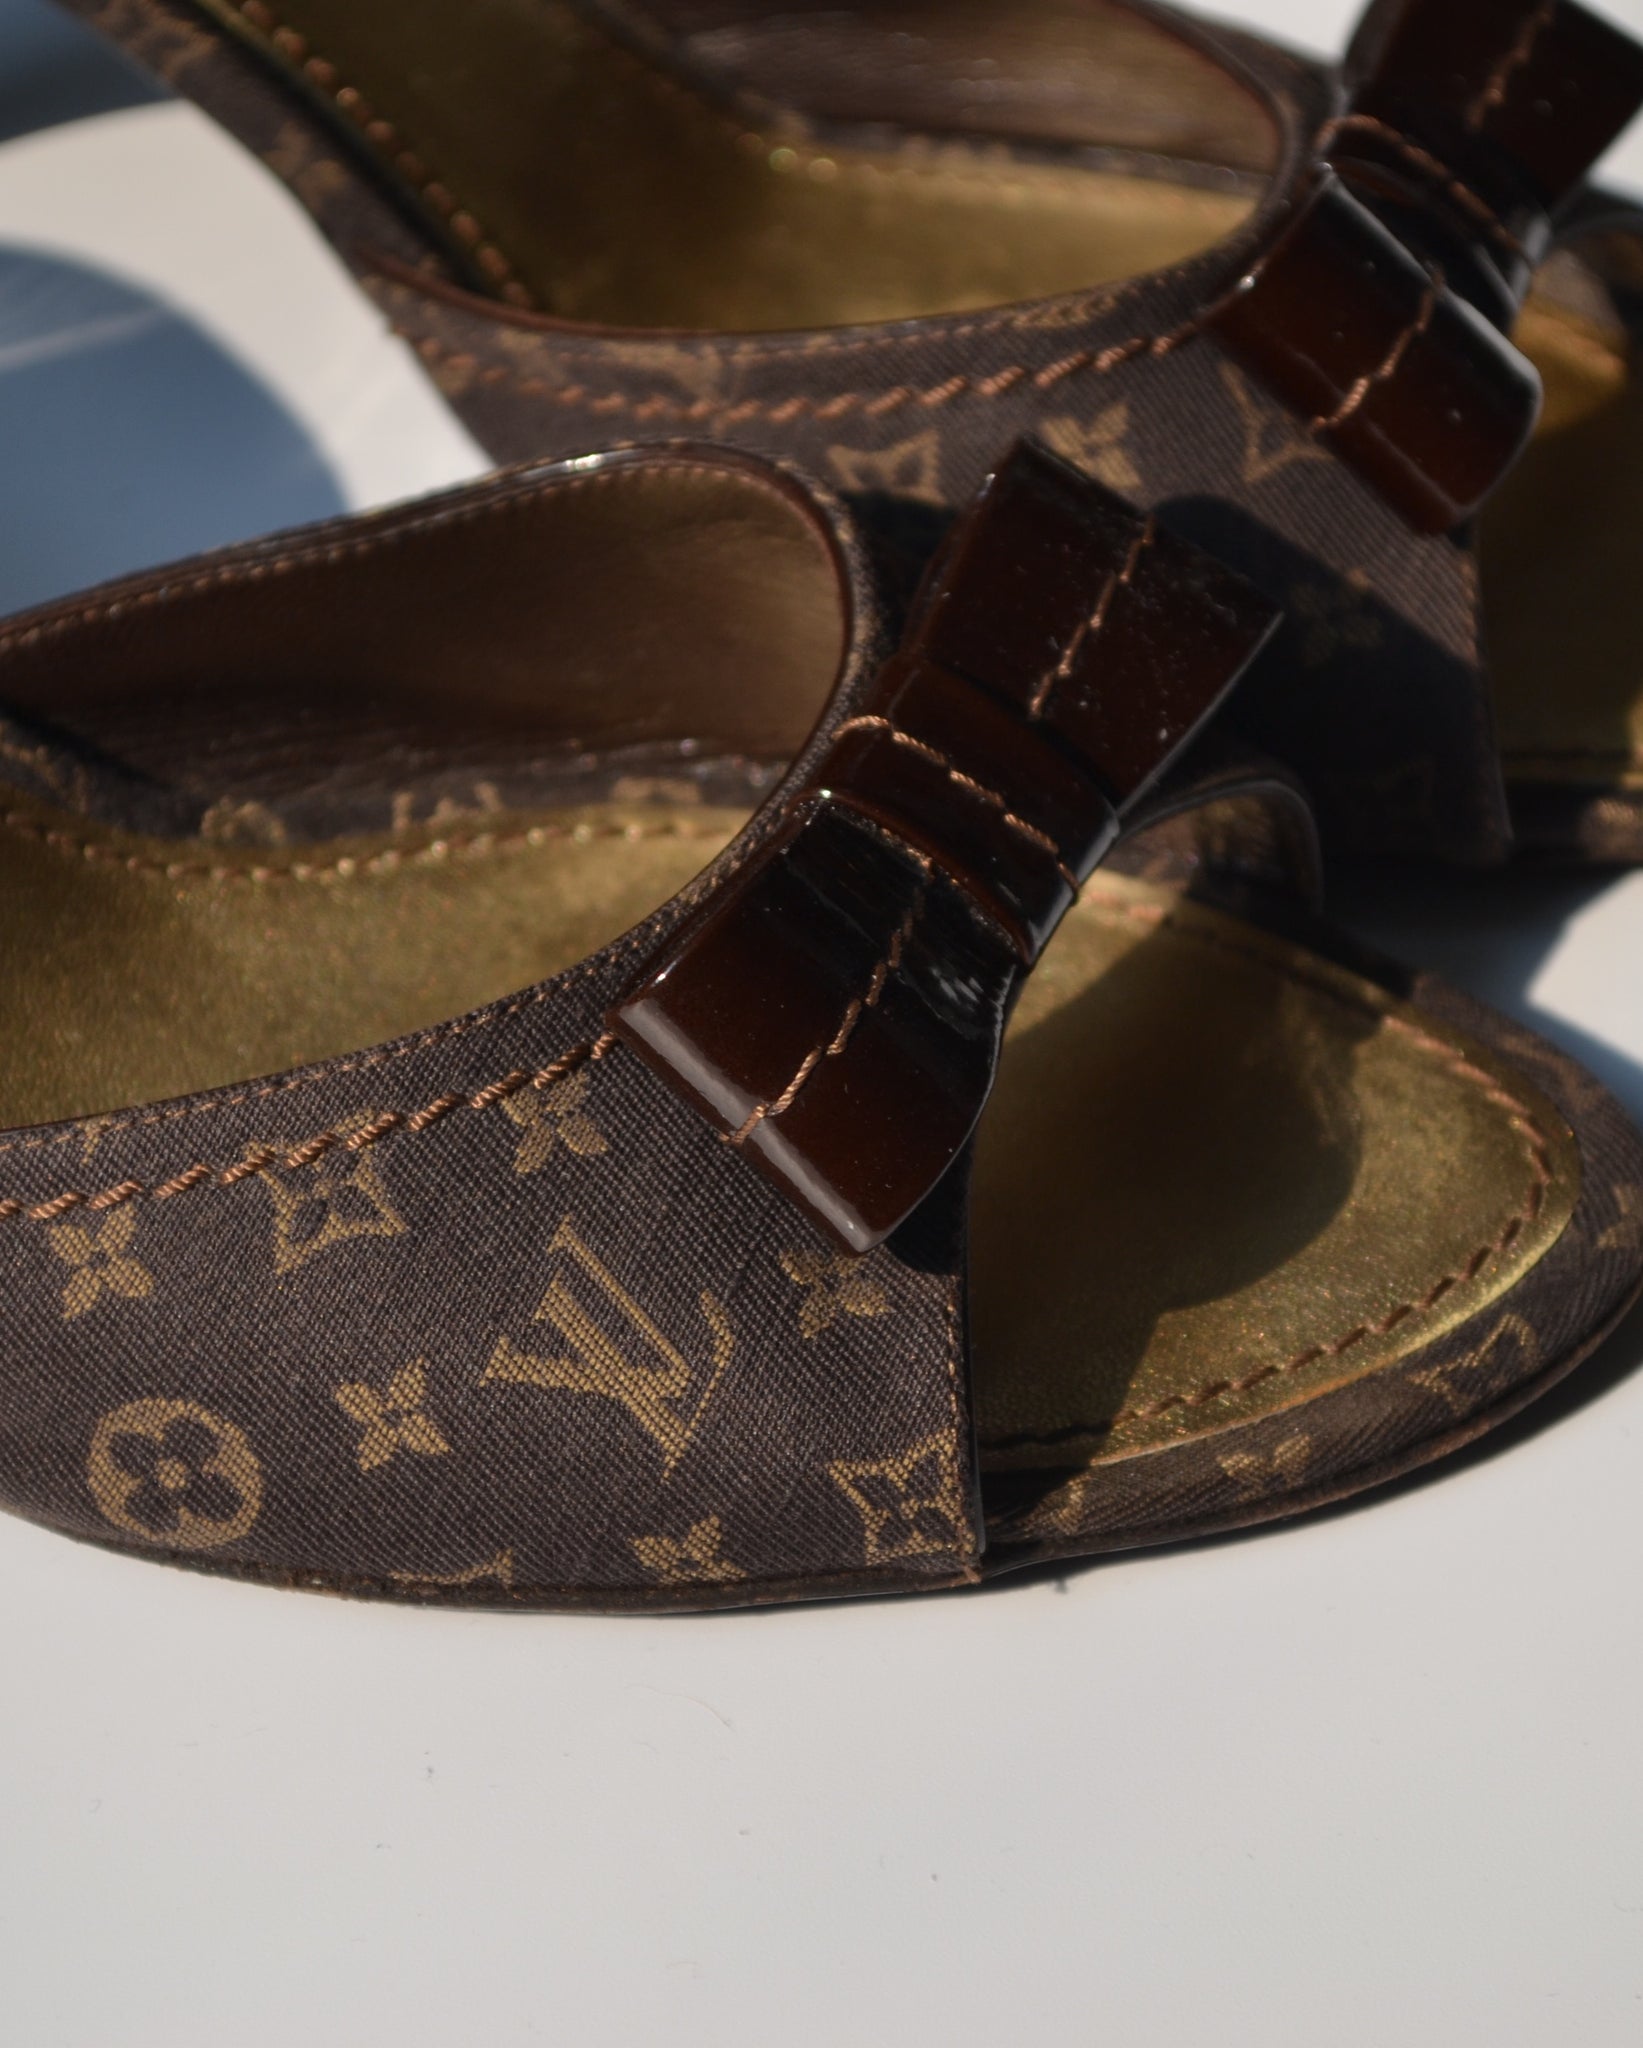 Louis Vuitton Brown Leather and Monogram Canvas Slide Sandals Size